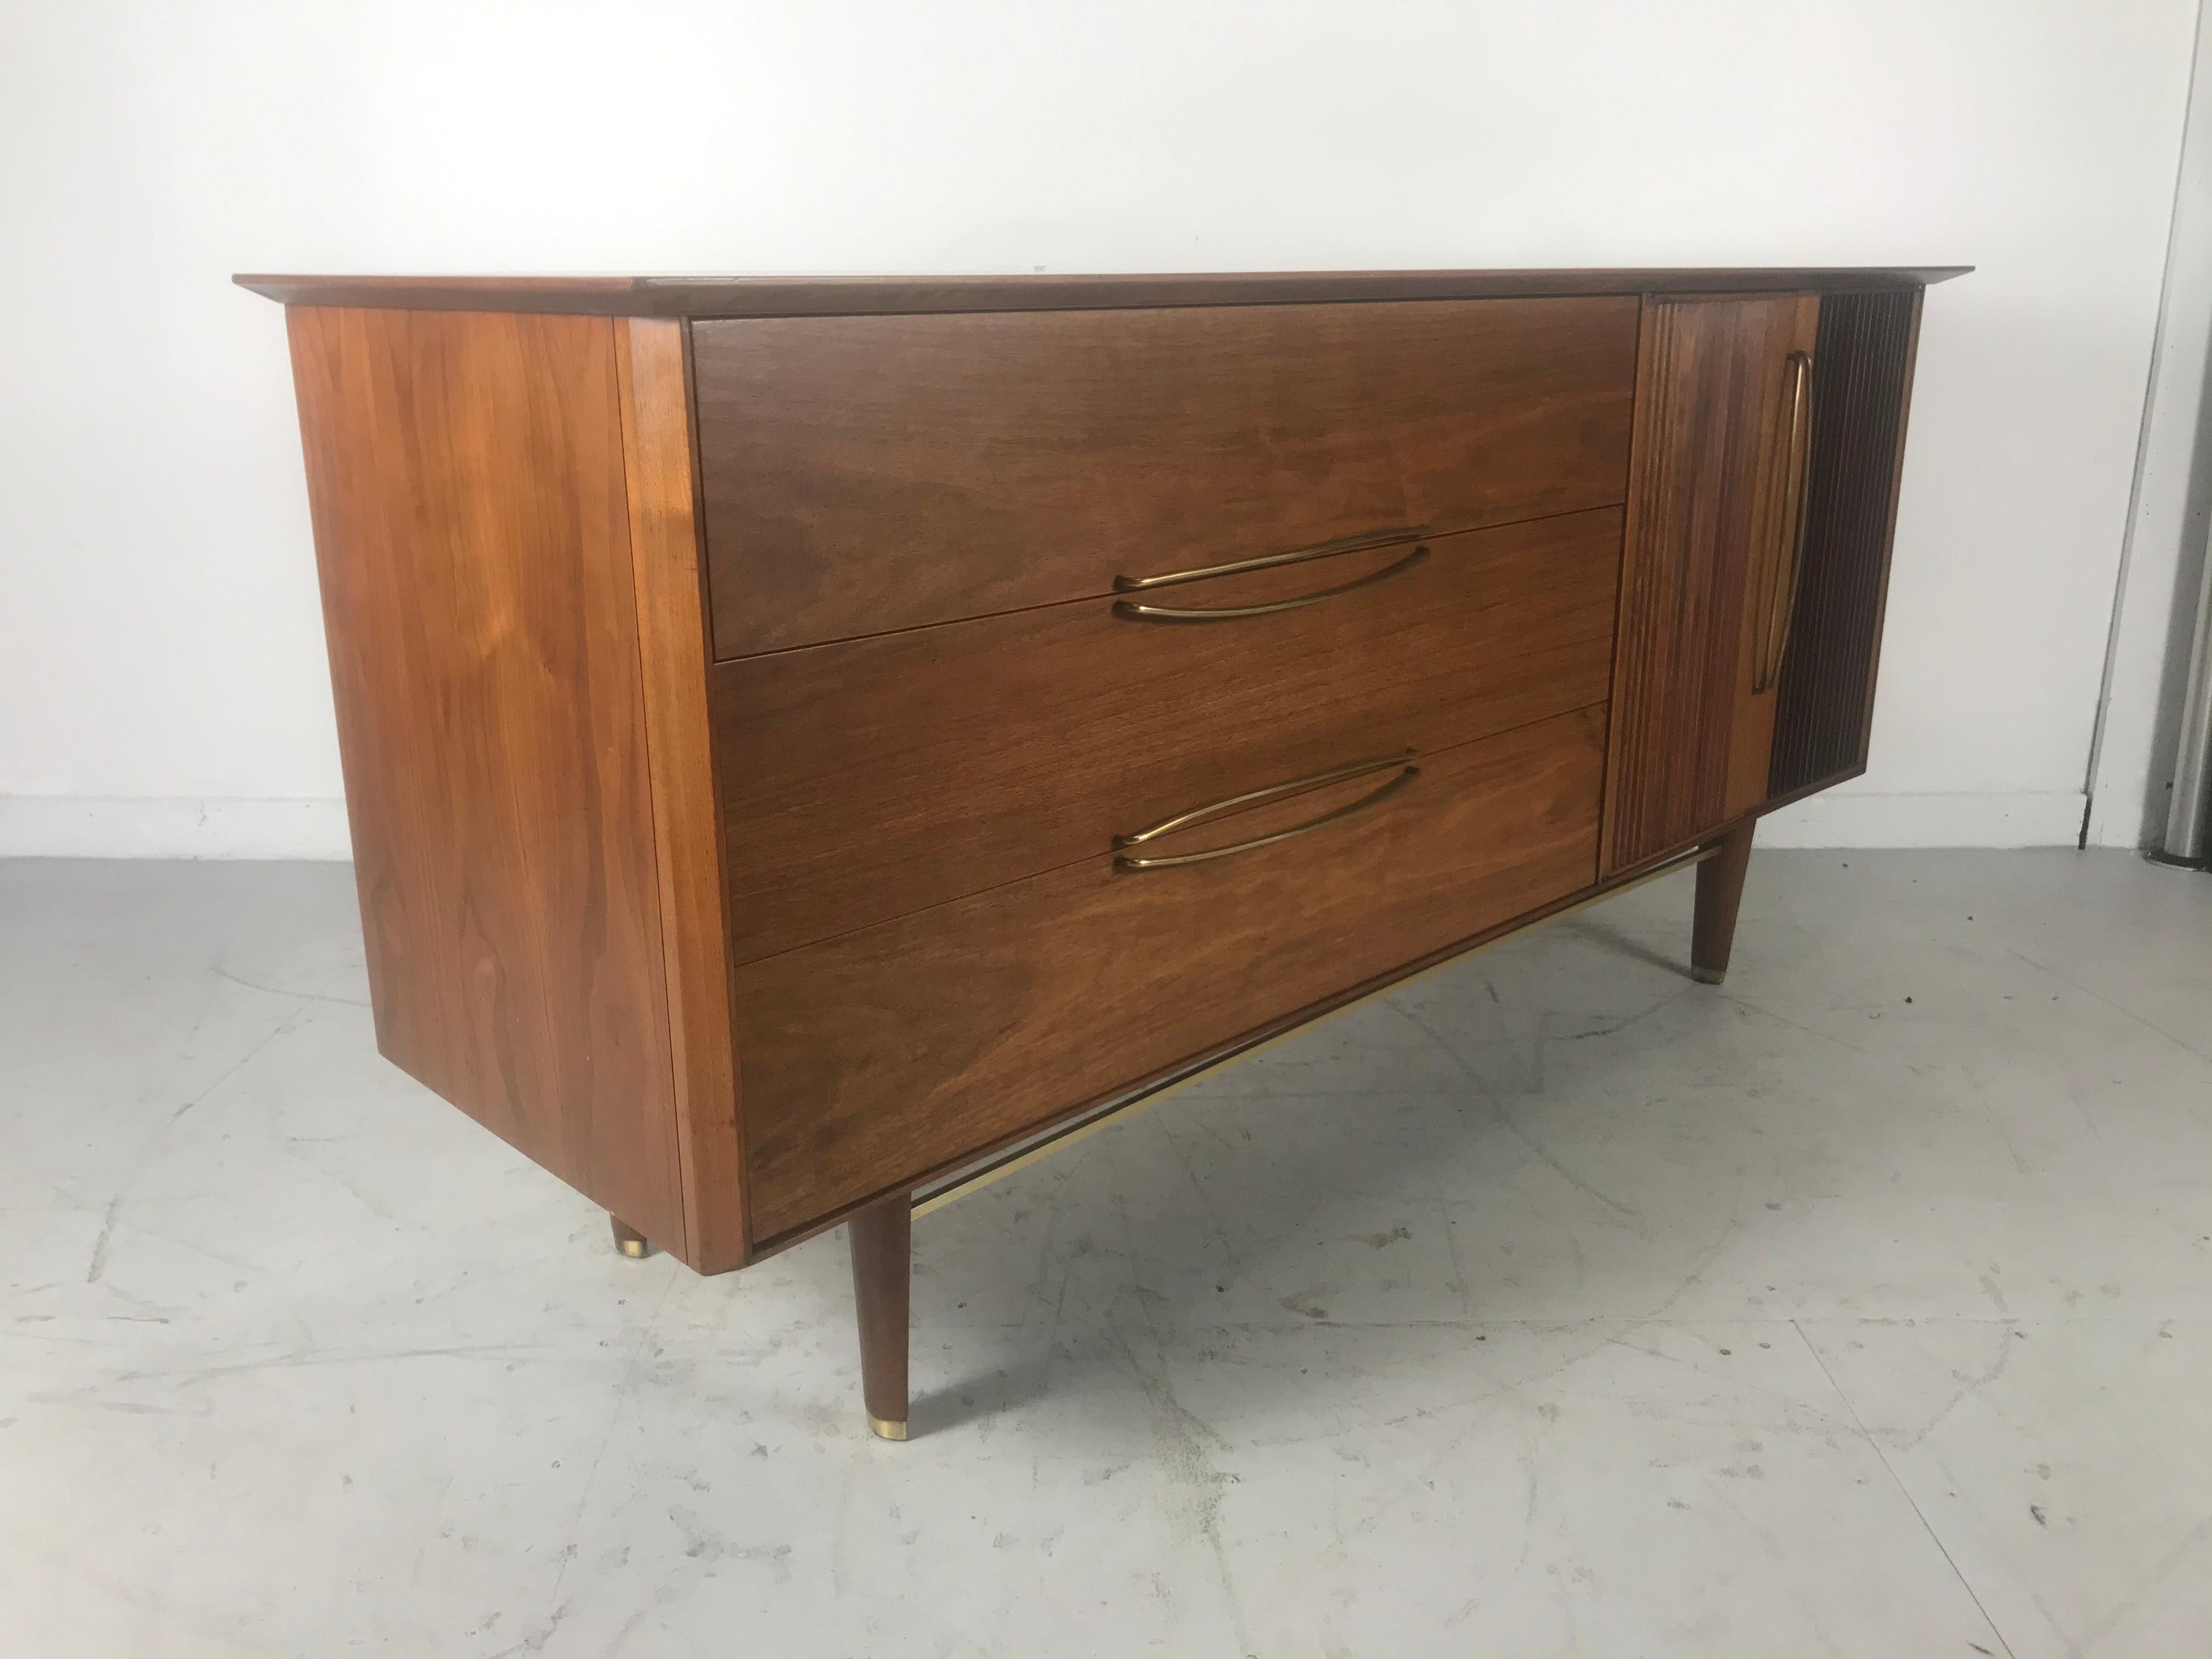 Stunning modernist walnut and brass dresser by Helen Hobey Baker. Superior quality and construction. Wonderful stylized brass hand pulls, three generous divided drawers (left), two doors with three drawers (right) Beautiful figured wood graining.